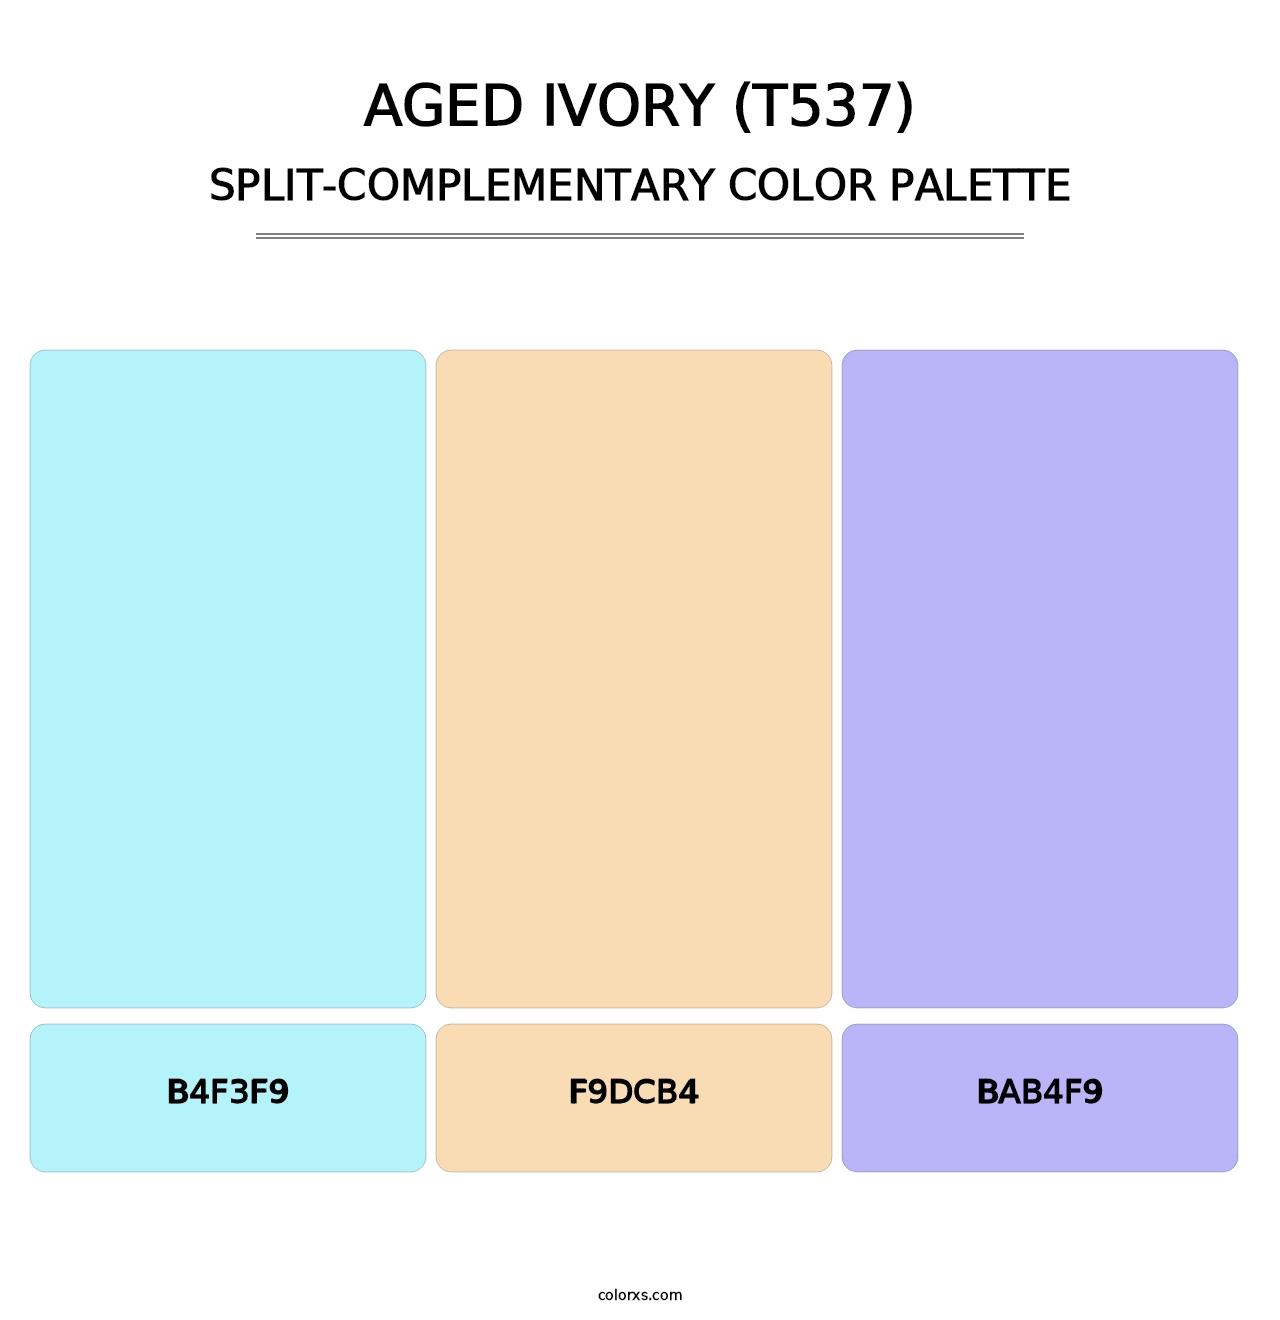 Aged Ivory (T537) - Split-Complementary Color Palette